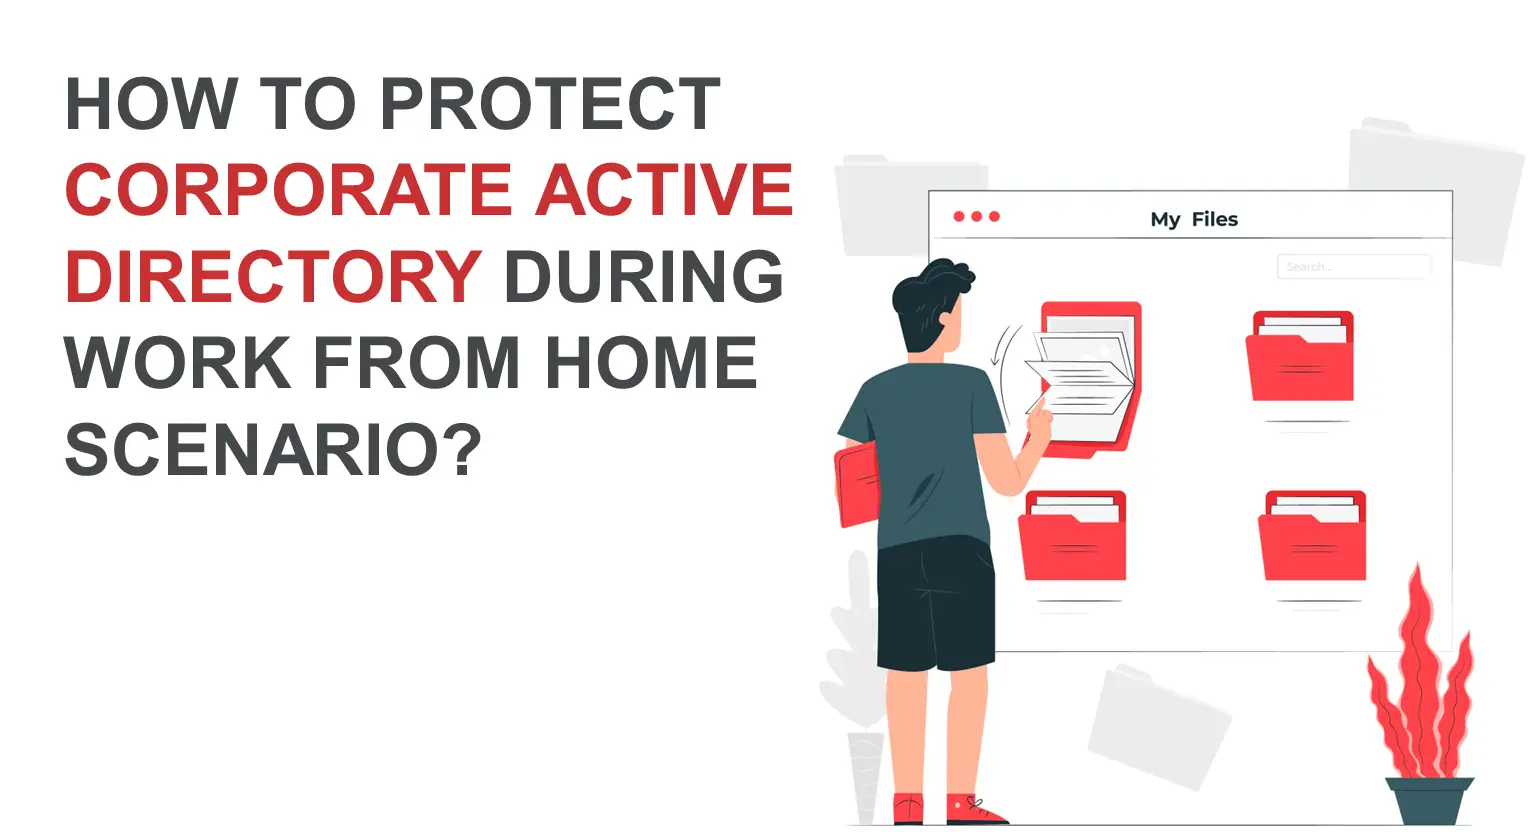 How To Protect Corporate Active Directory During Work From Home Scenario?